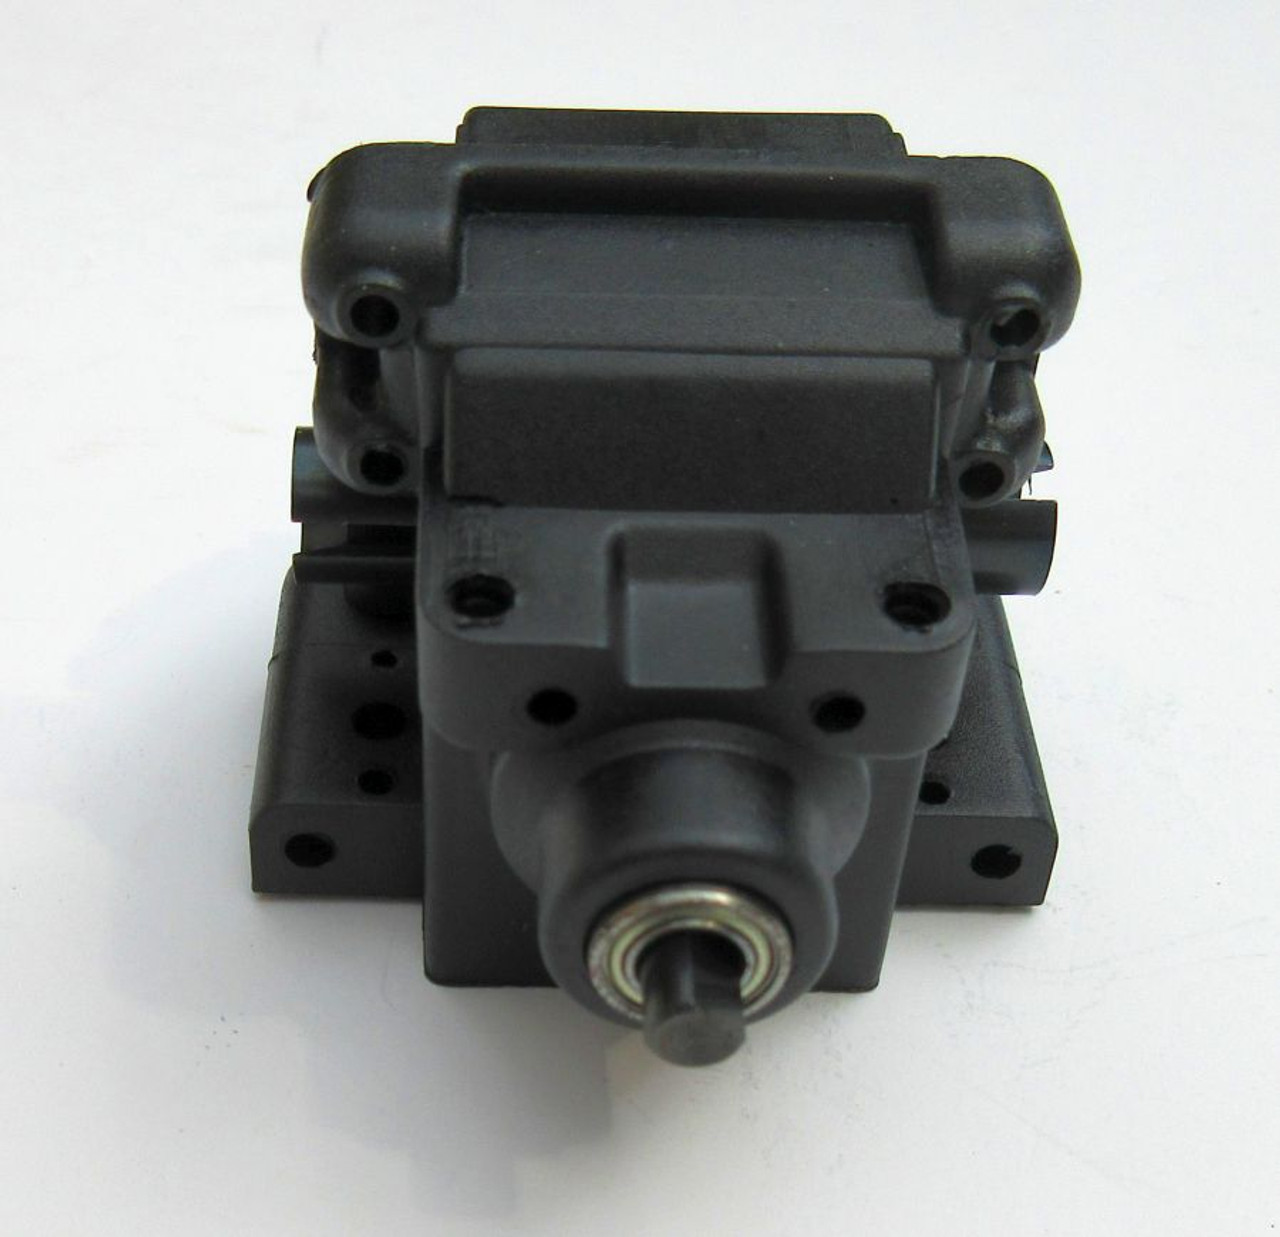 06064 Rear Gear Box Complete For 1:10 RC HSP,  Himoto, Redcat 